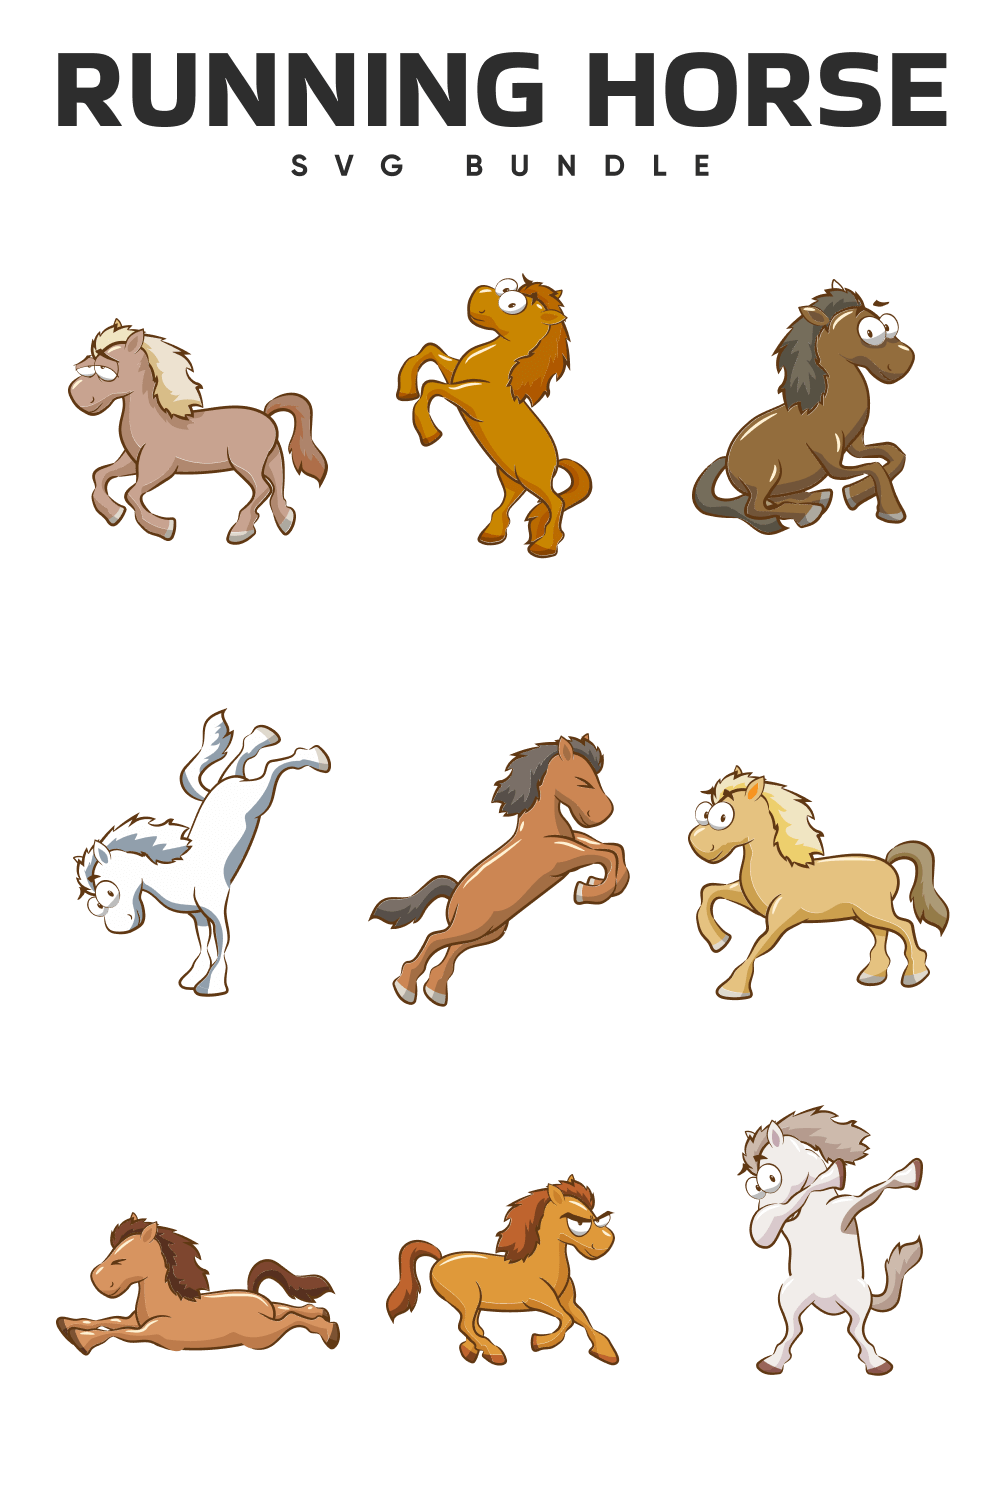 Bunch of horses that are running in different directions.